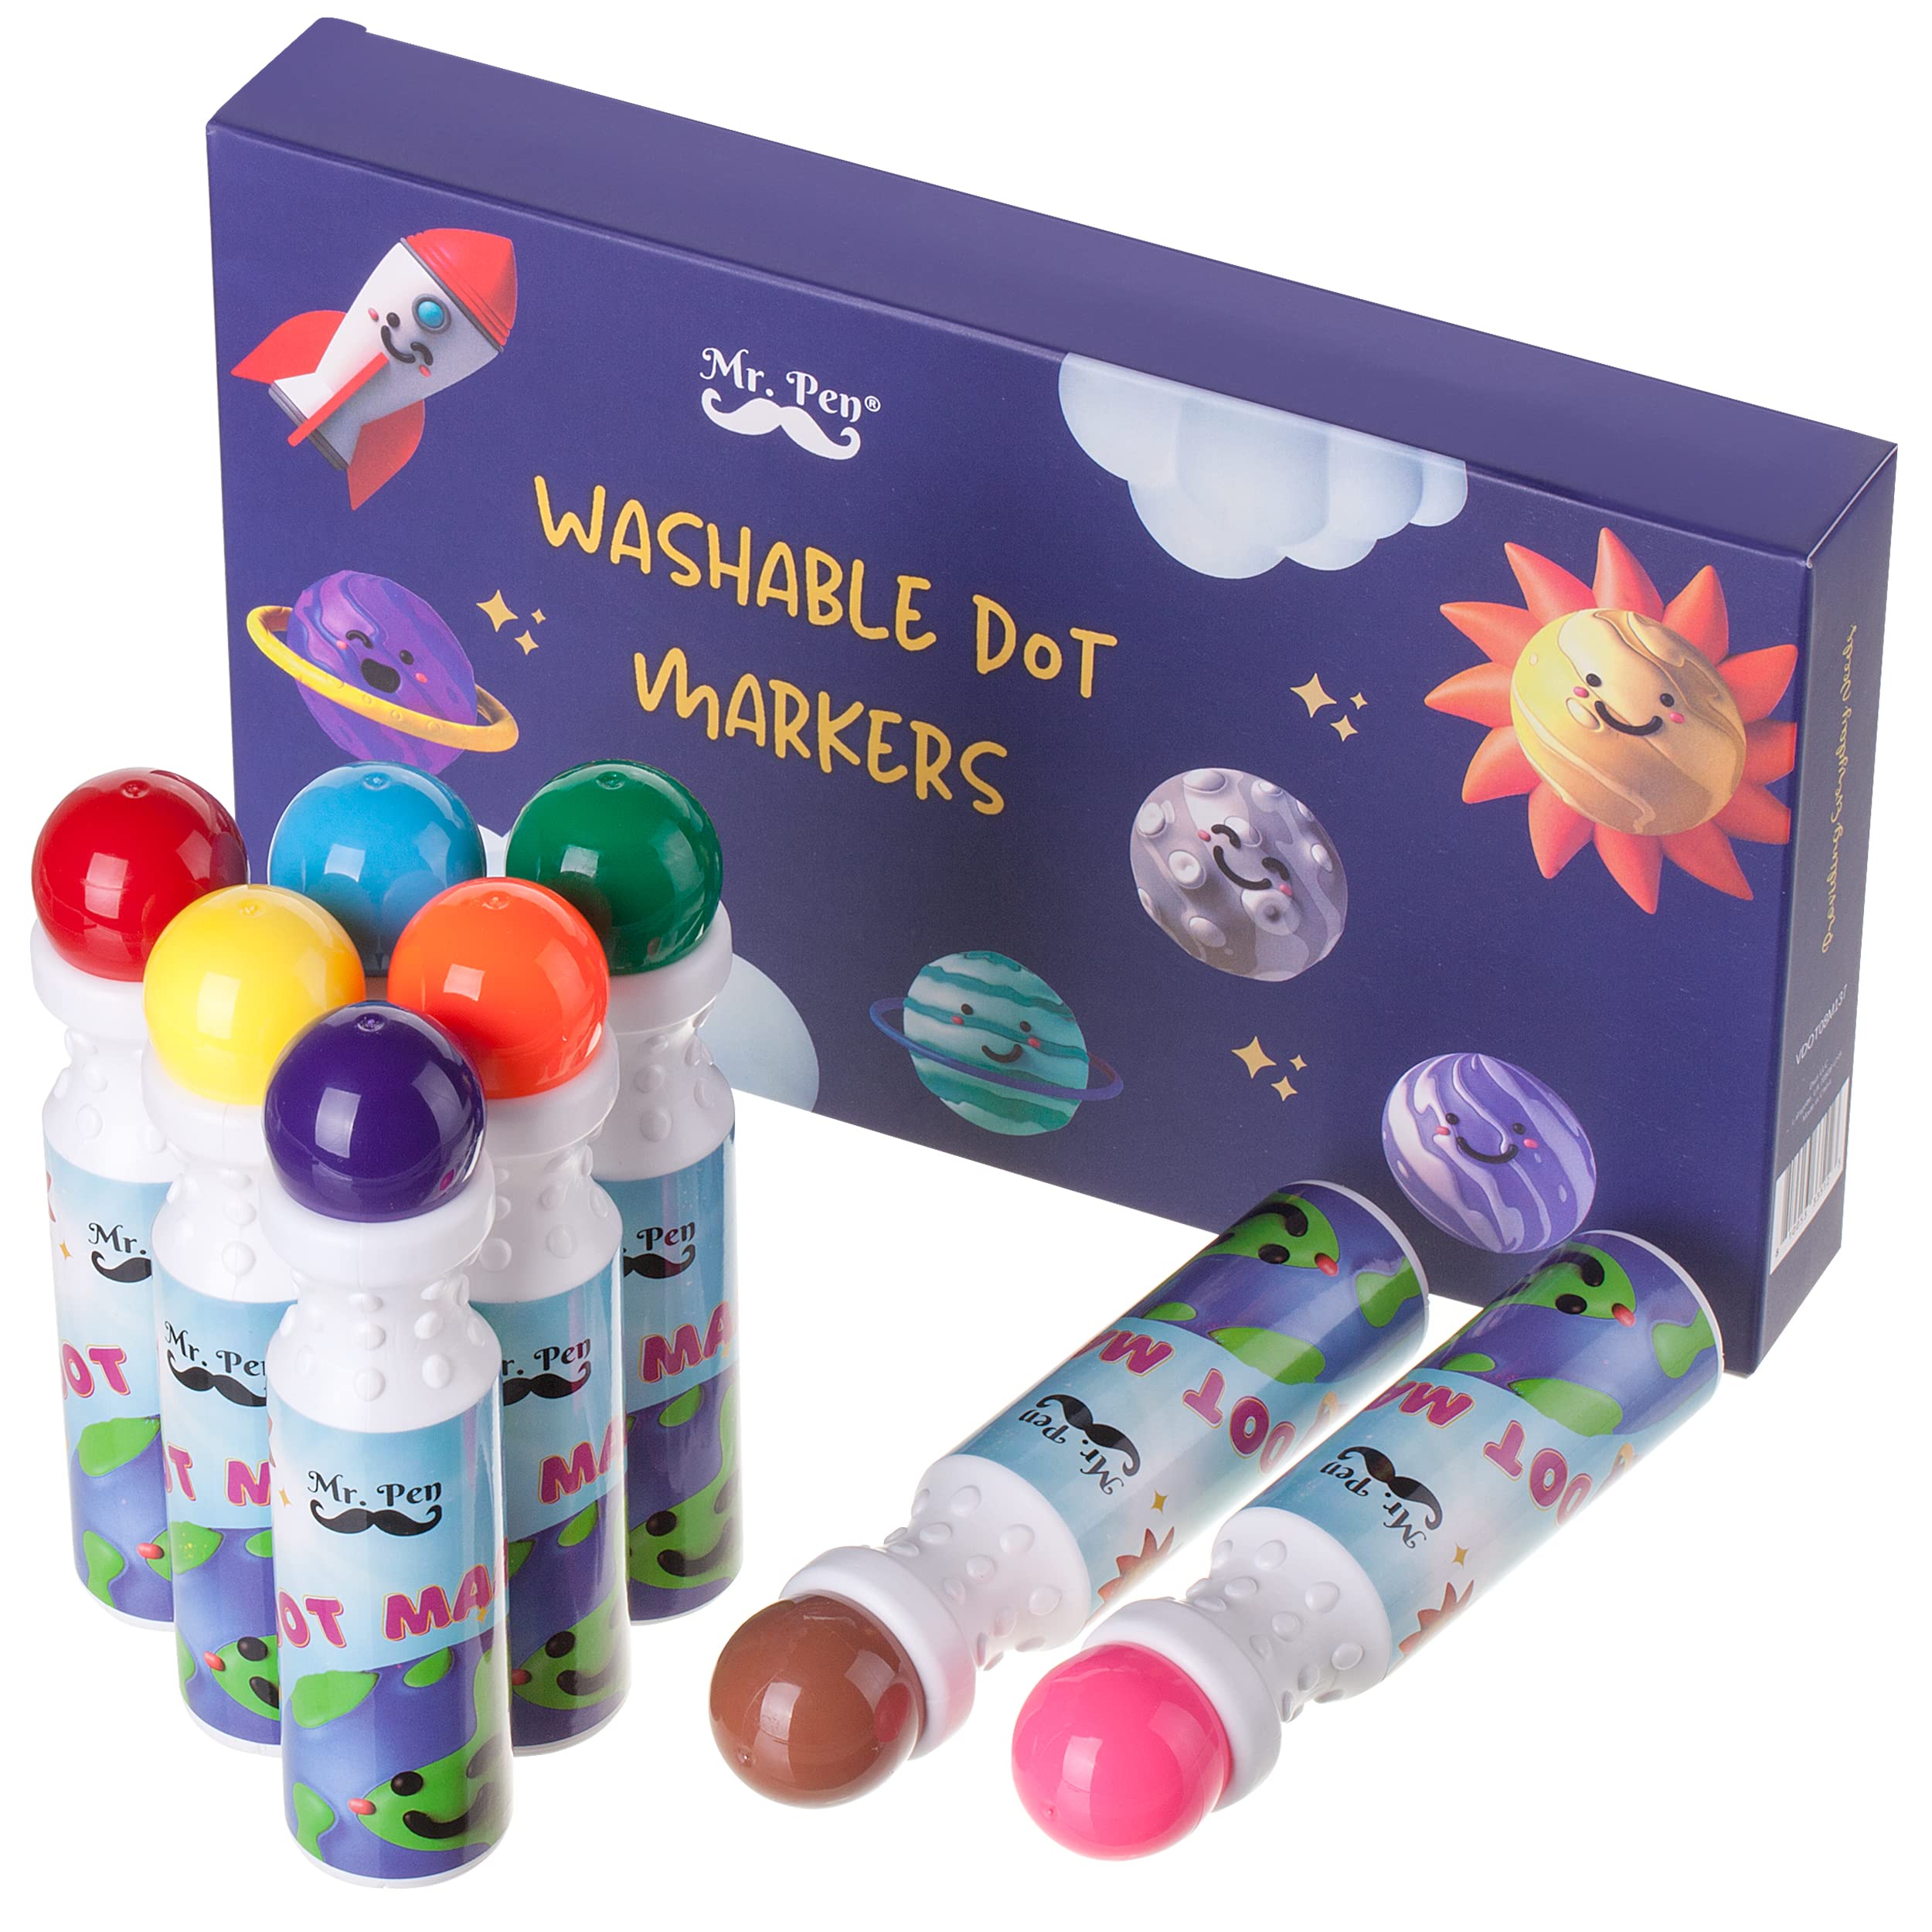 Ultimate Stationery Dot Markers, Dot Markers for Qatar